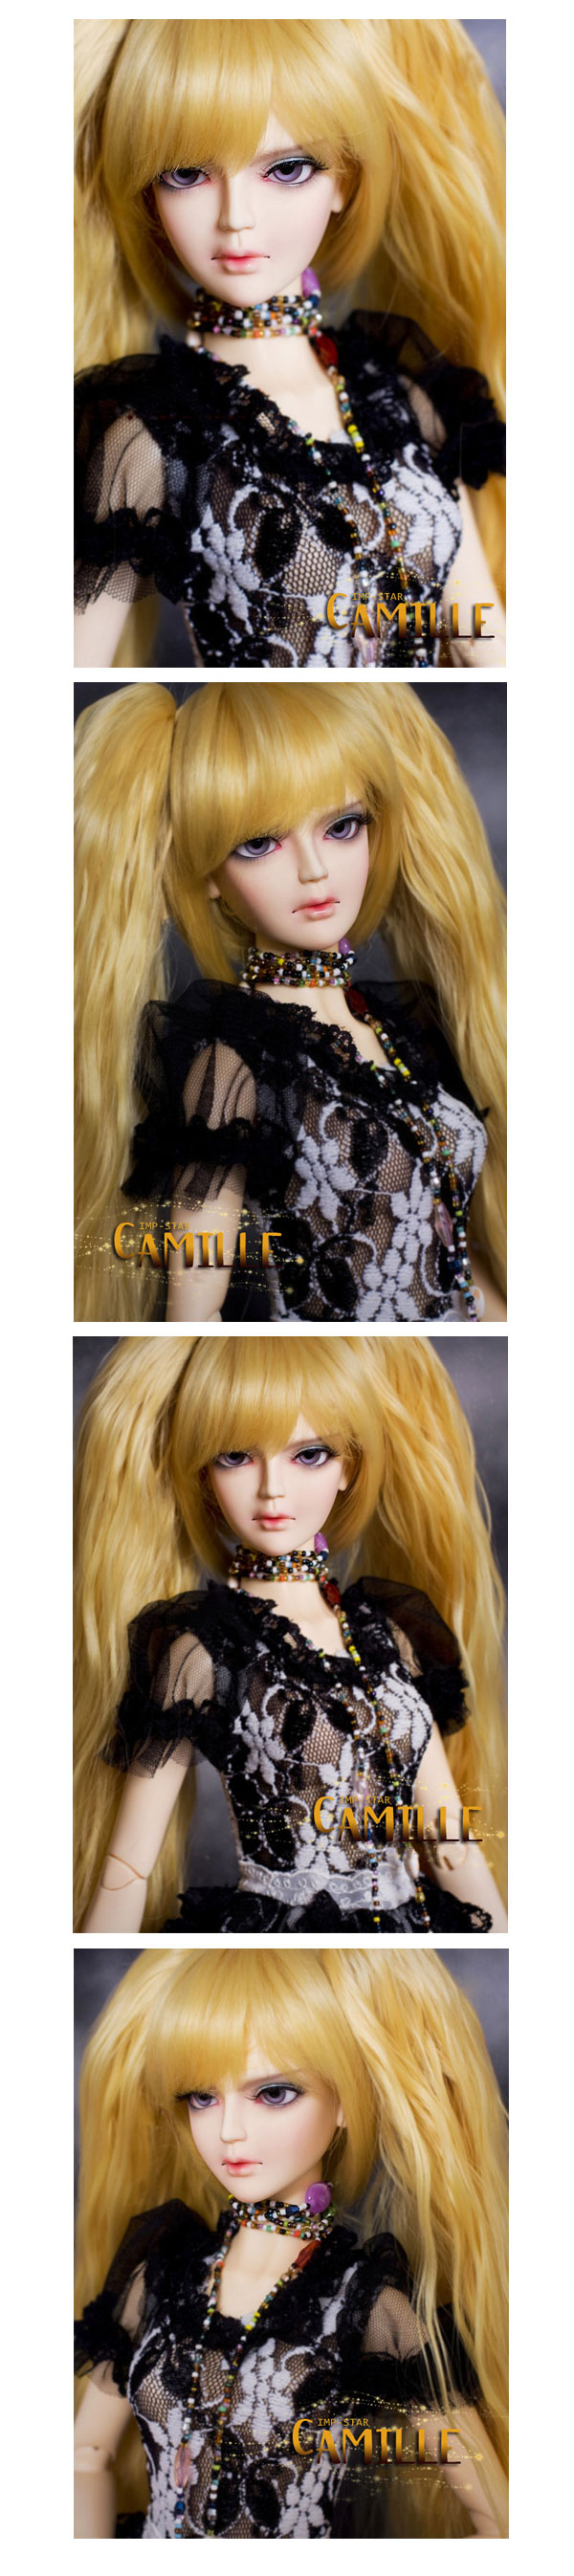 BJD Camille 63.5cm Girl Ball-jointed Doll